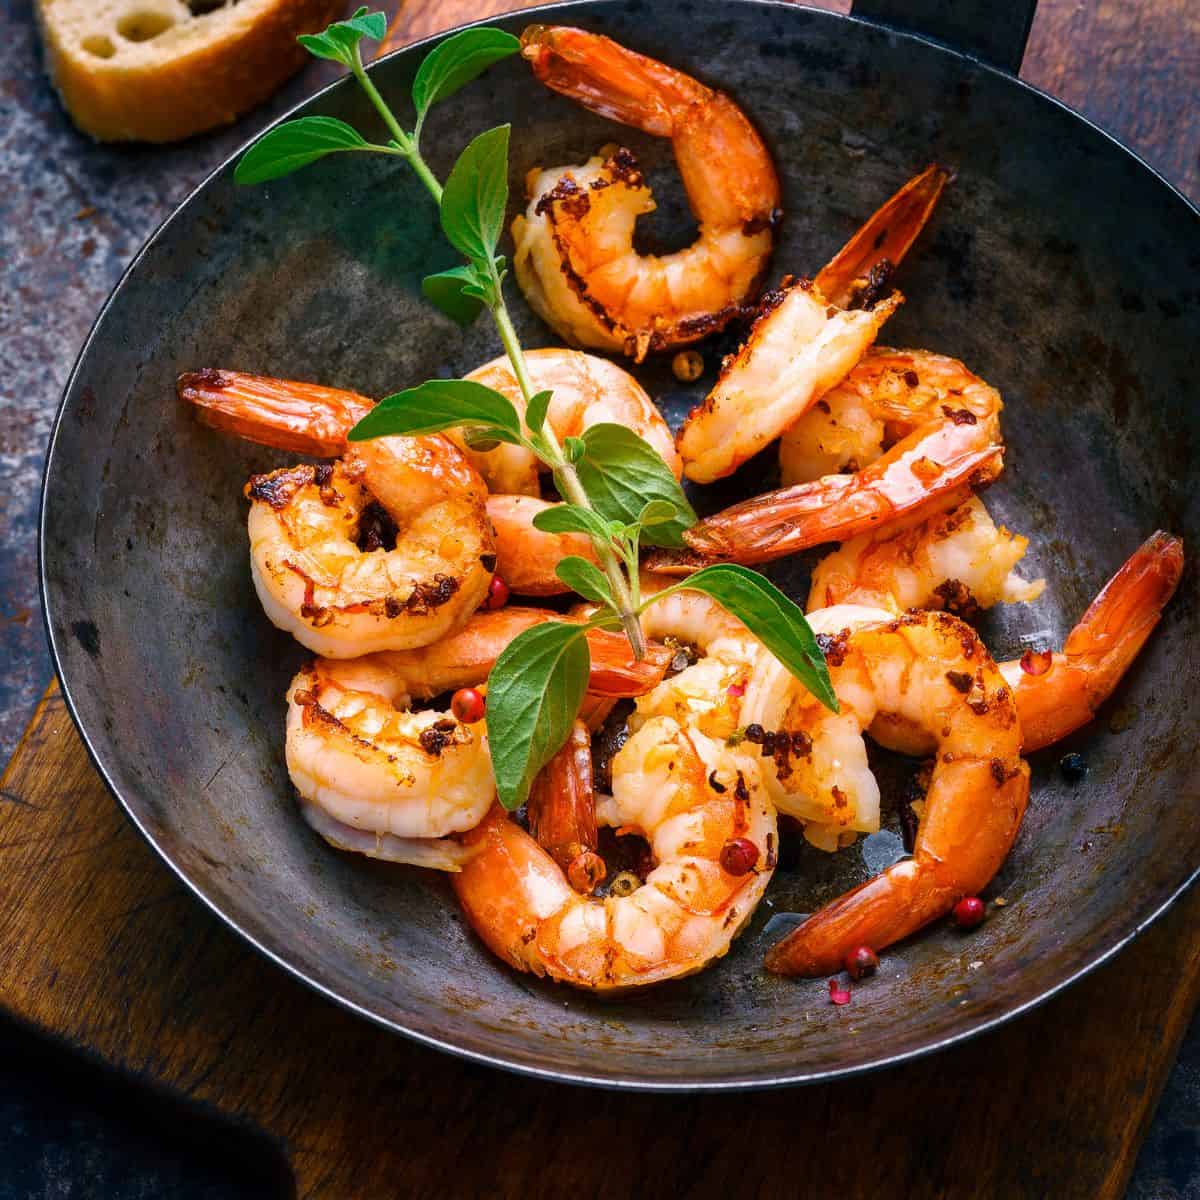 Cooked shrimp with fresh herb in a dark bowl.